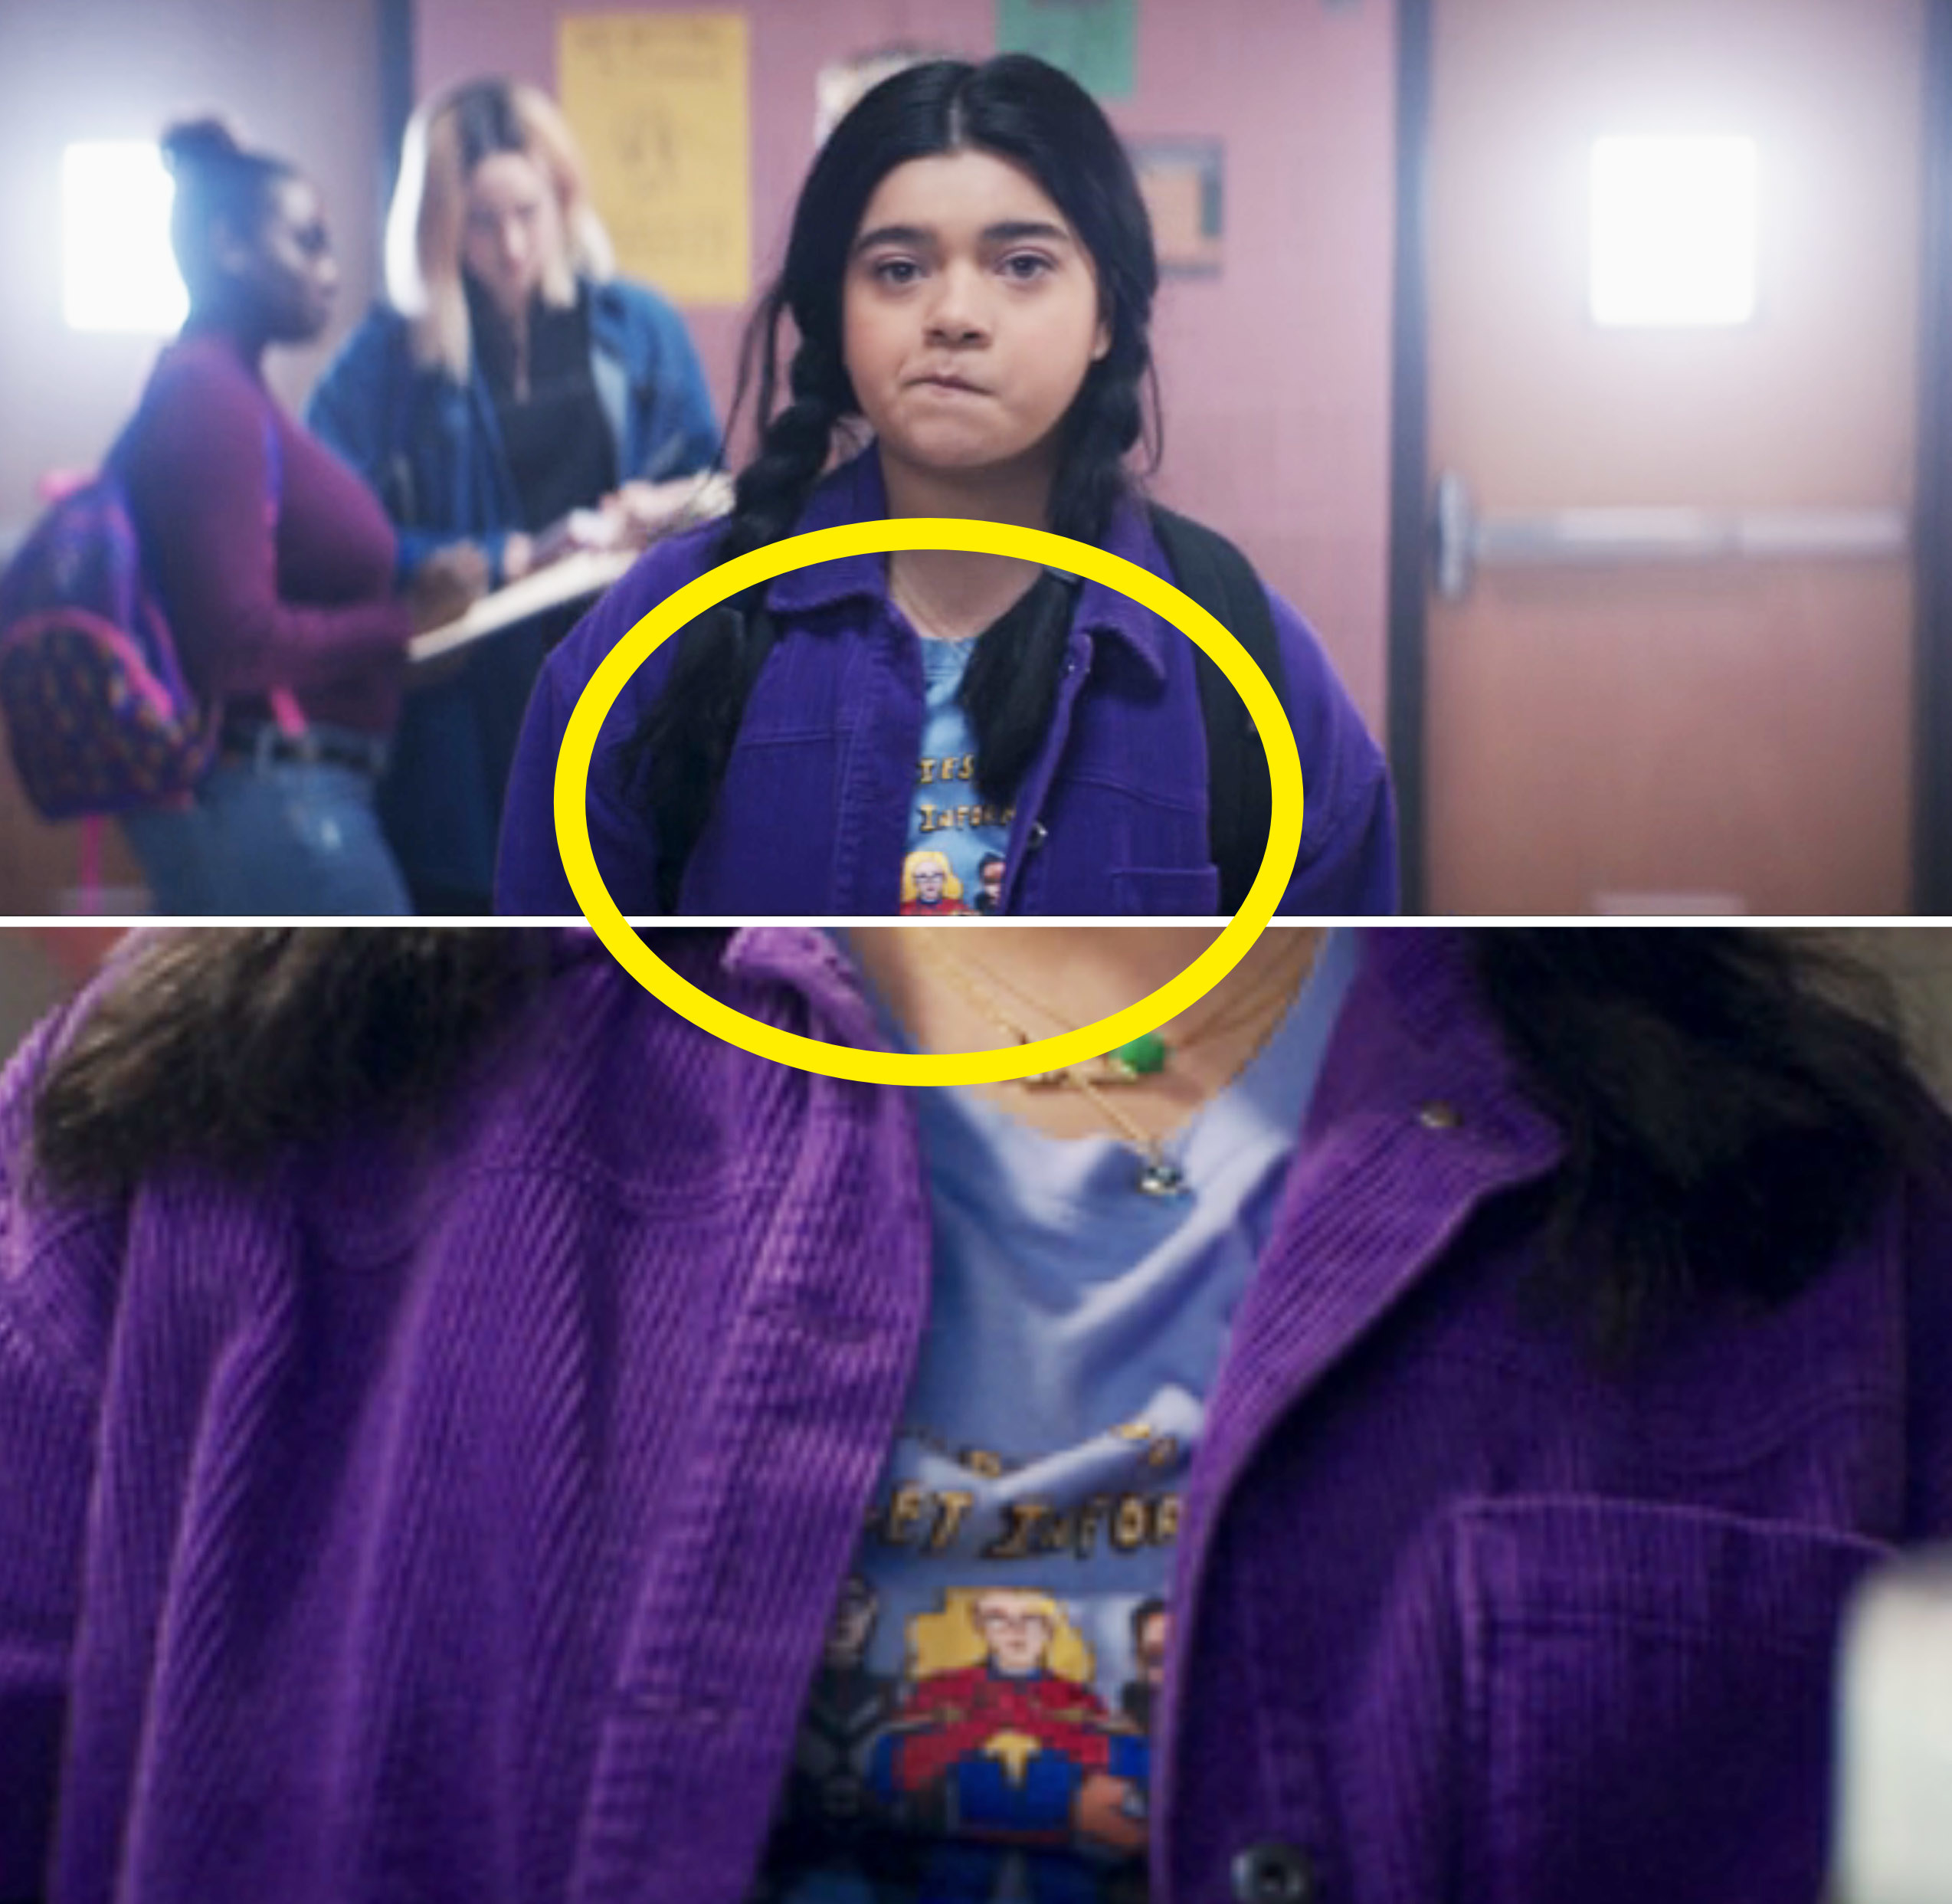 Kamala is wearing a jacket, so only a small bit of her T-shirt underneath is visible, but you can make out Captain Marvel flanked on either side by Wasp and Valkyrie